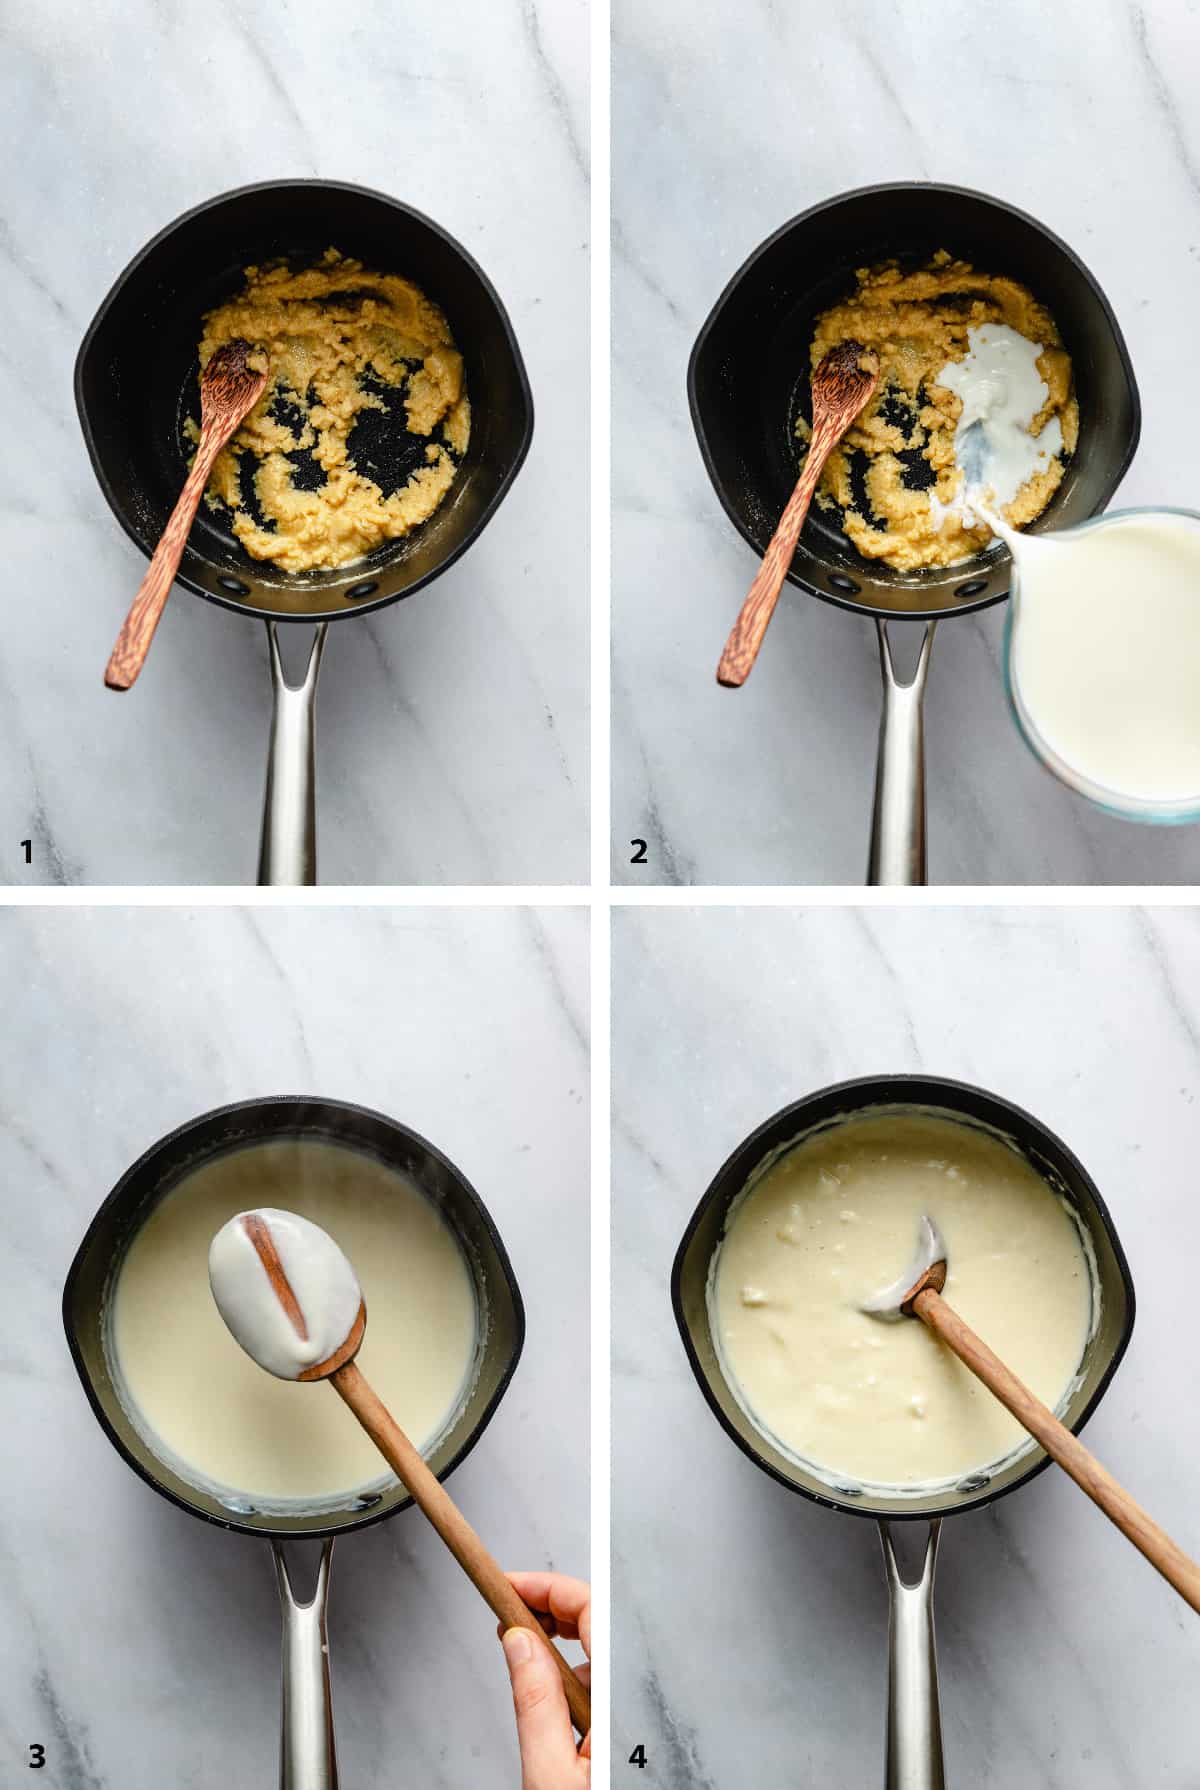 Process steps to creating the creamy cheese sauce.